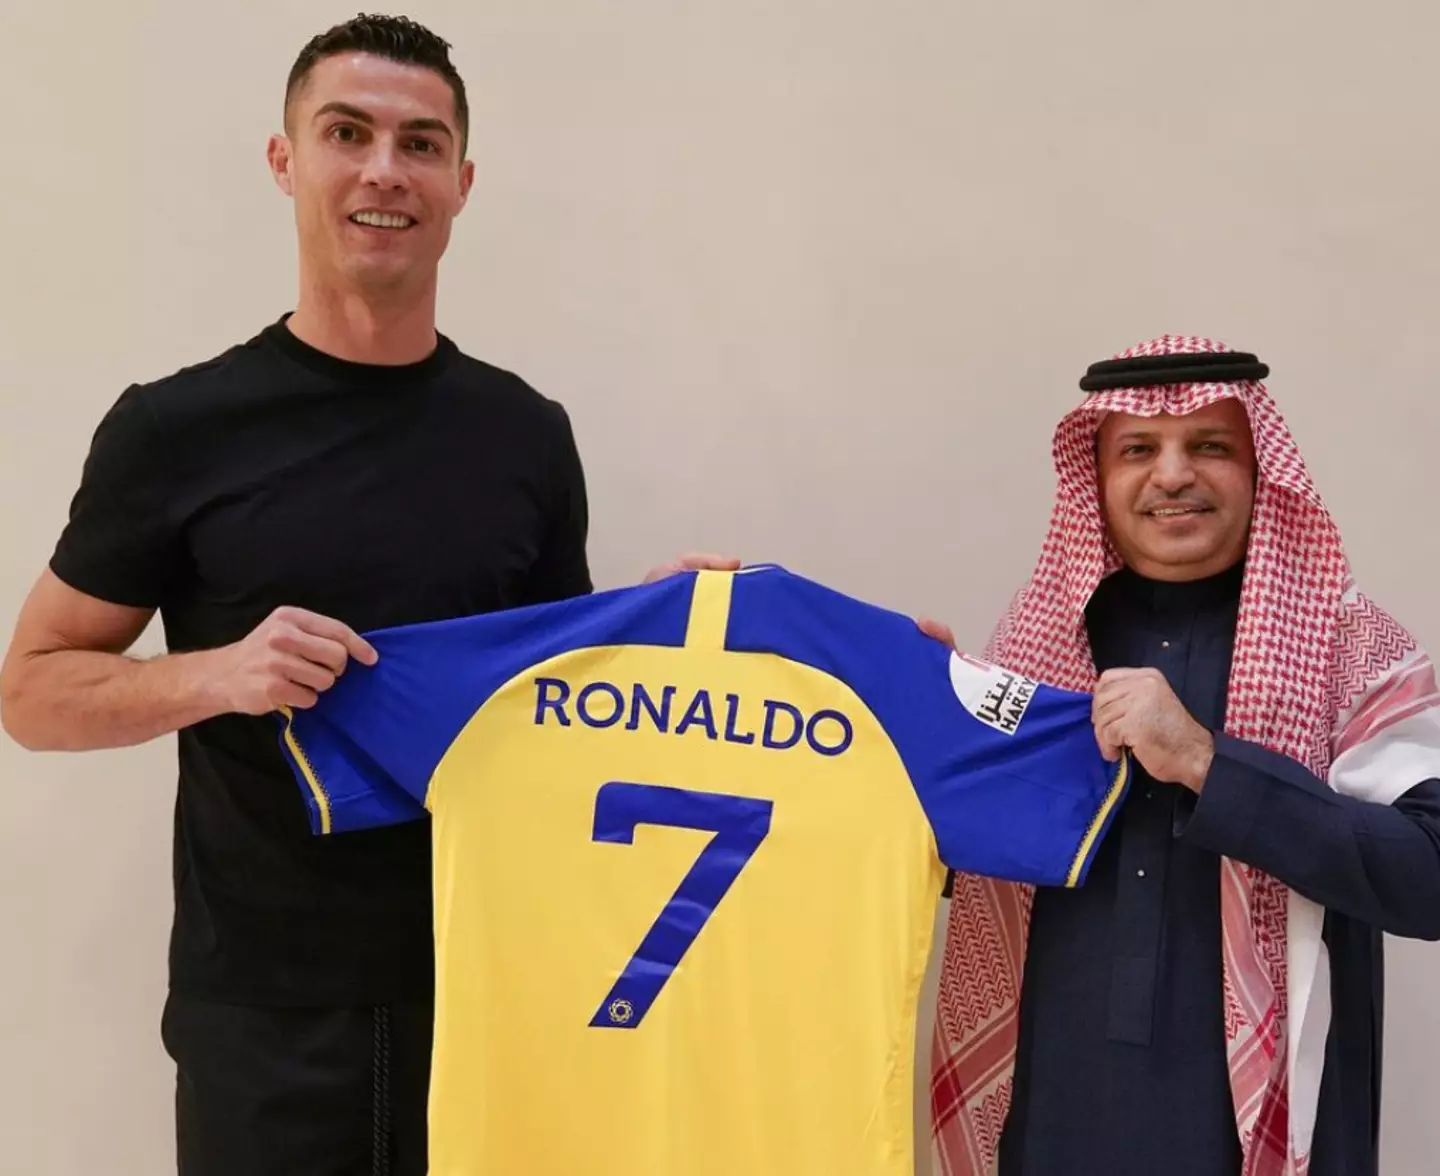 Ronaldo moved to Saudi Arabia after signing with Al-Nassr.